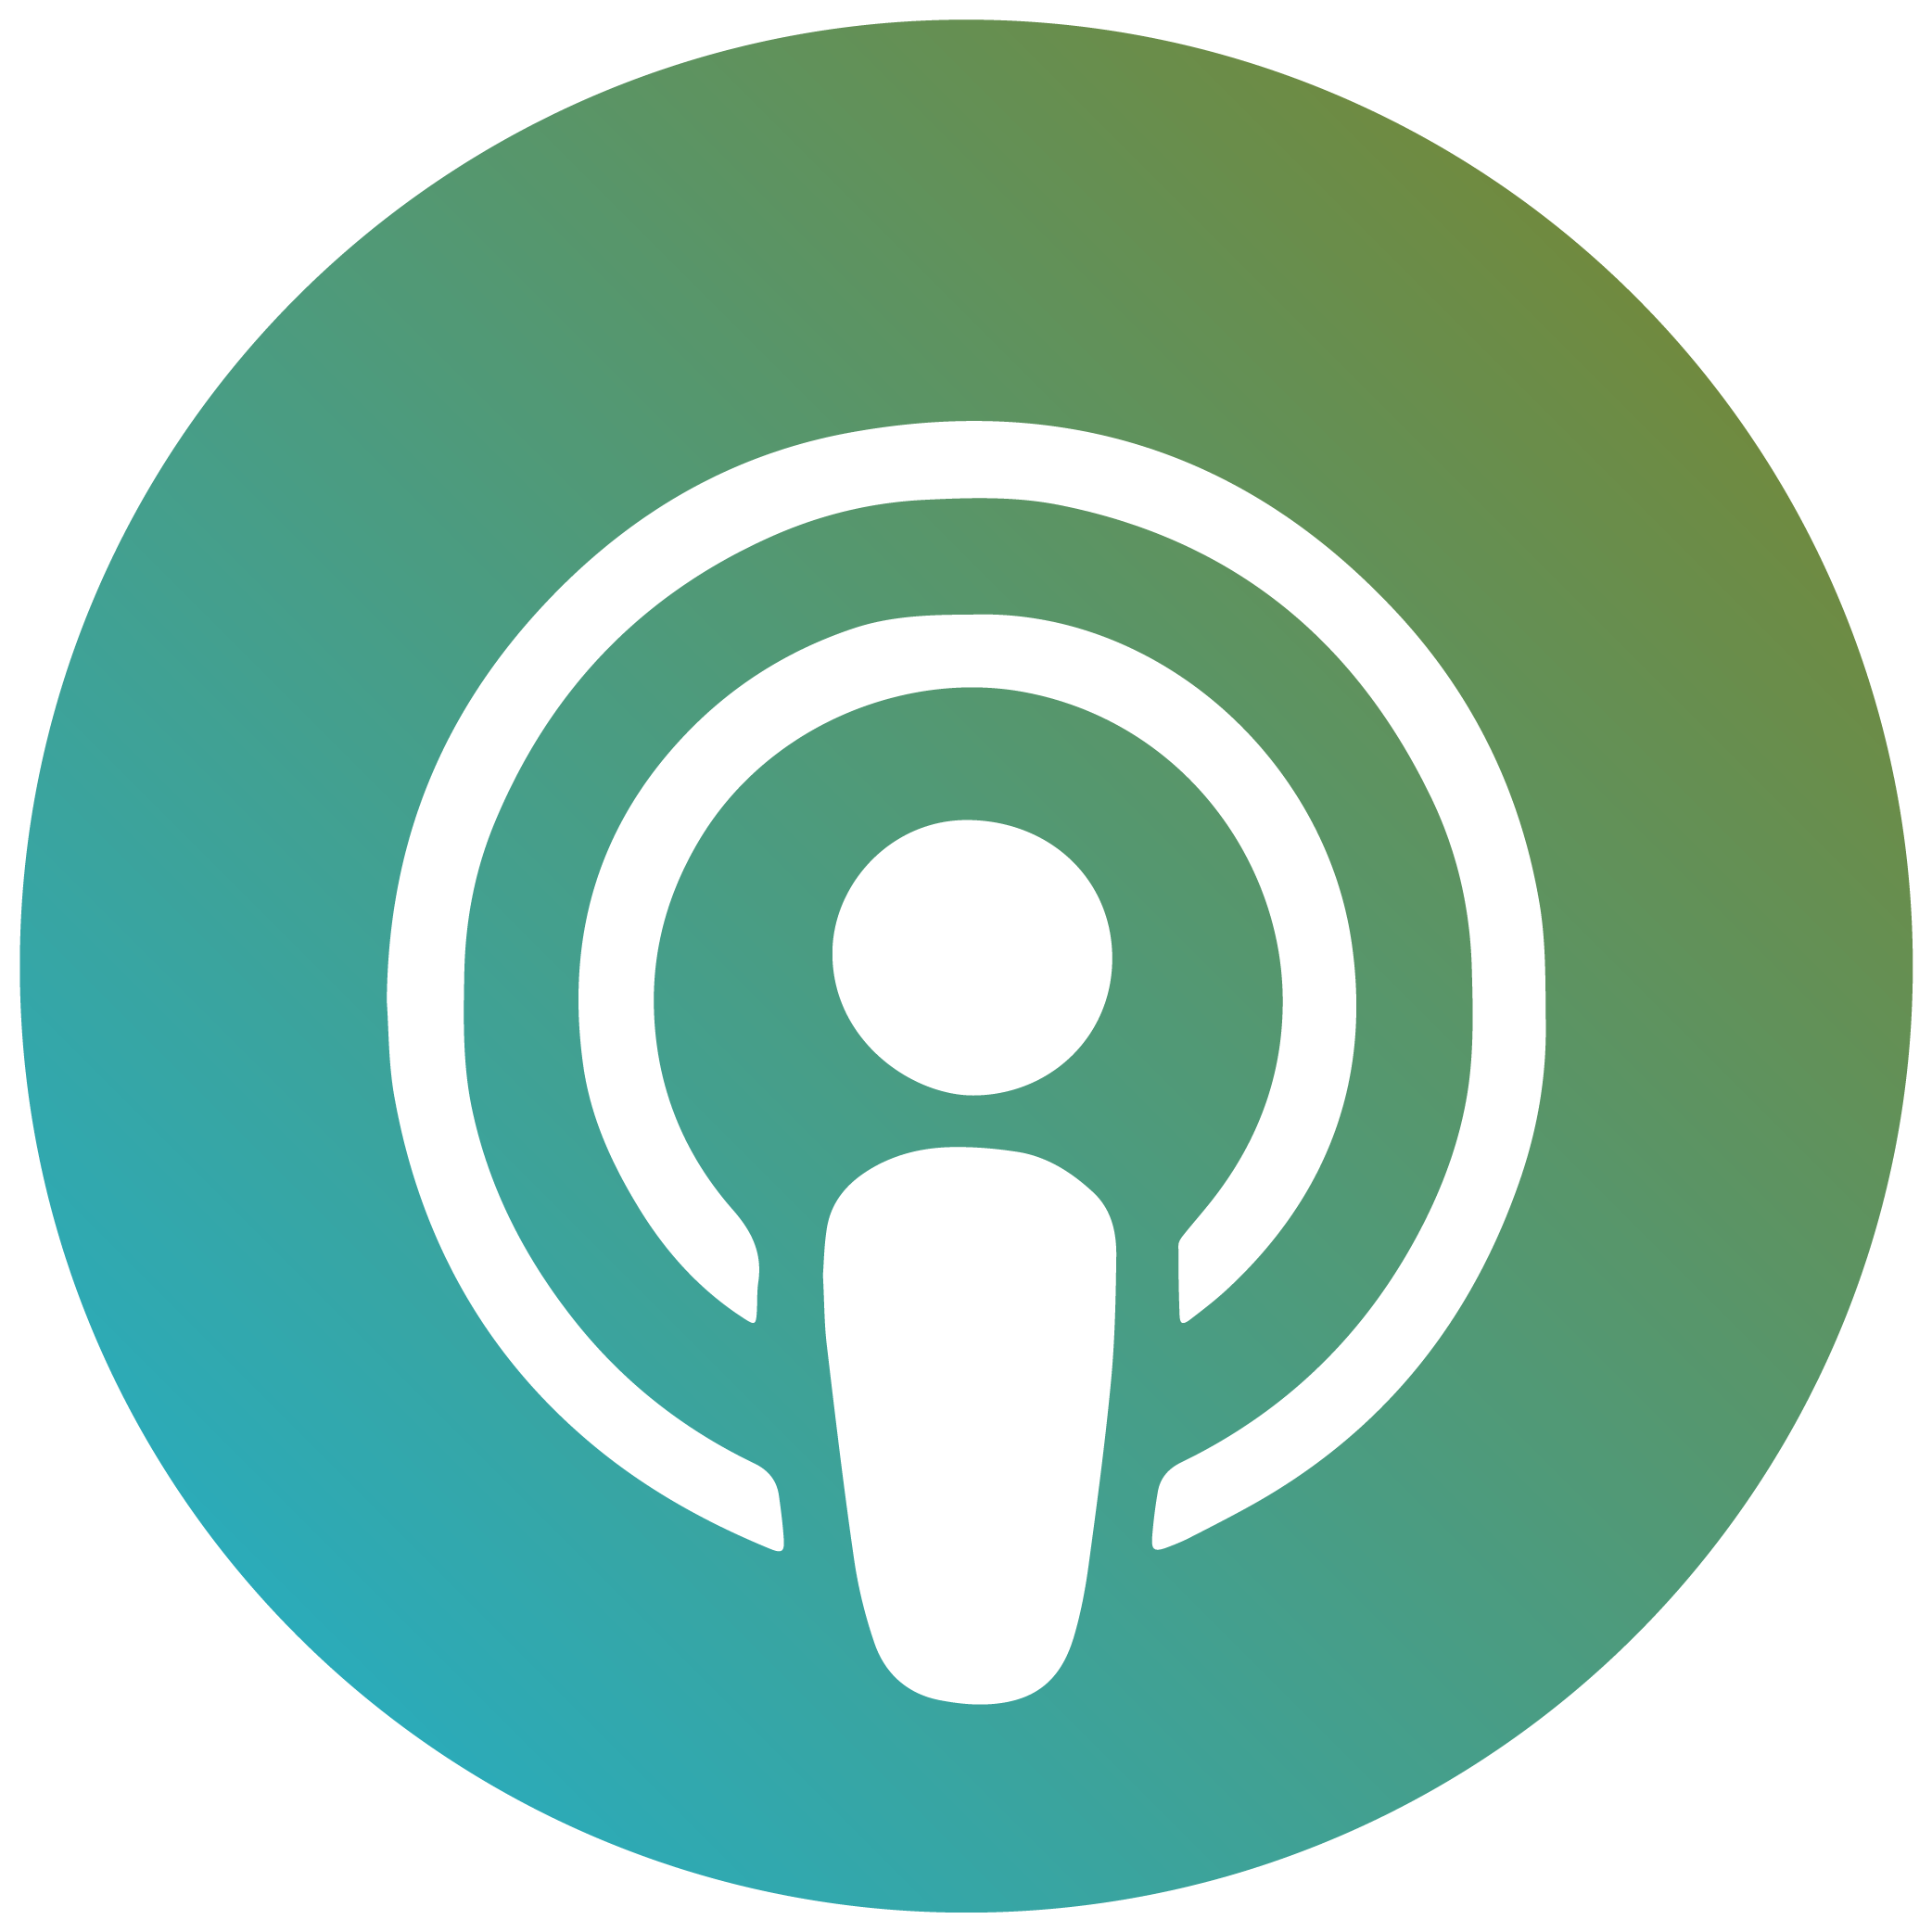 podcast-icons-apple-gradient.png?lossy=1&strip=1&webp=1